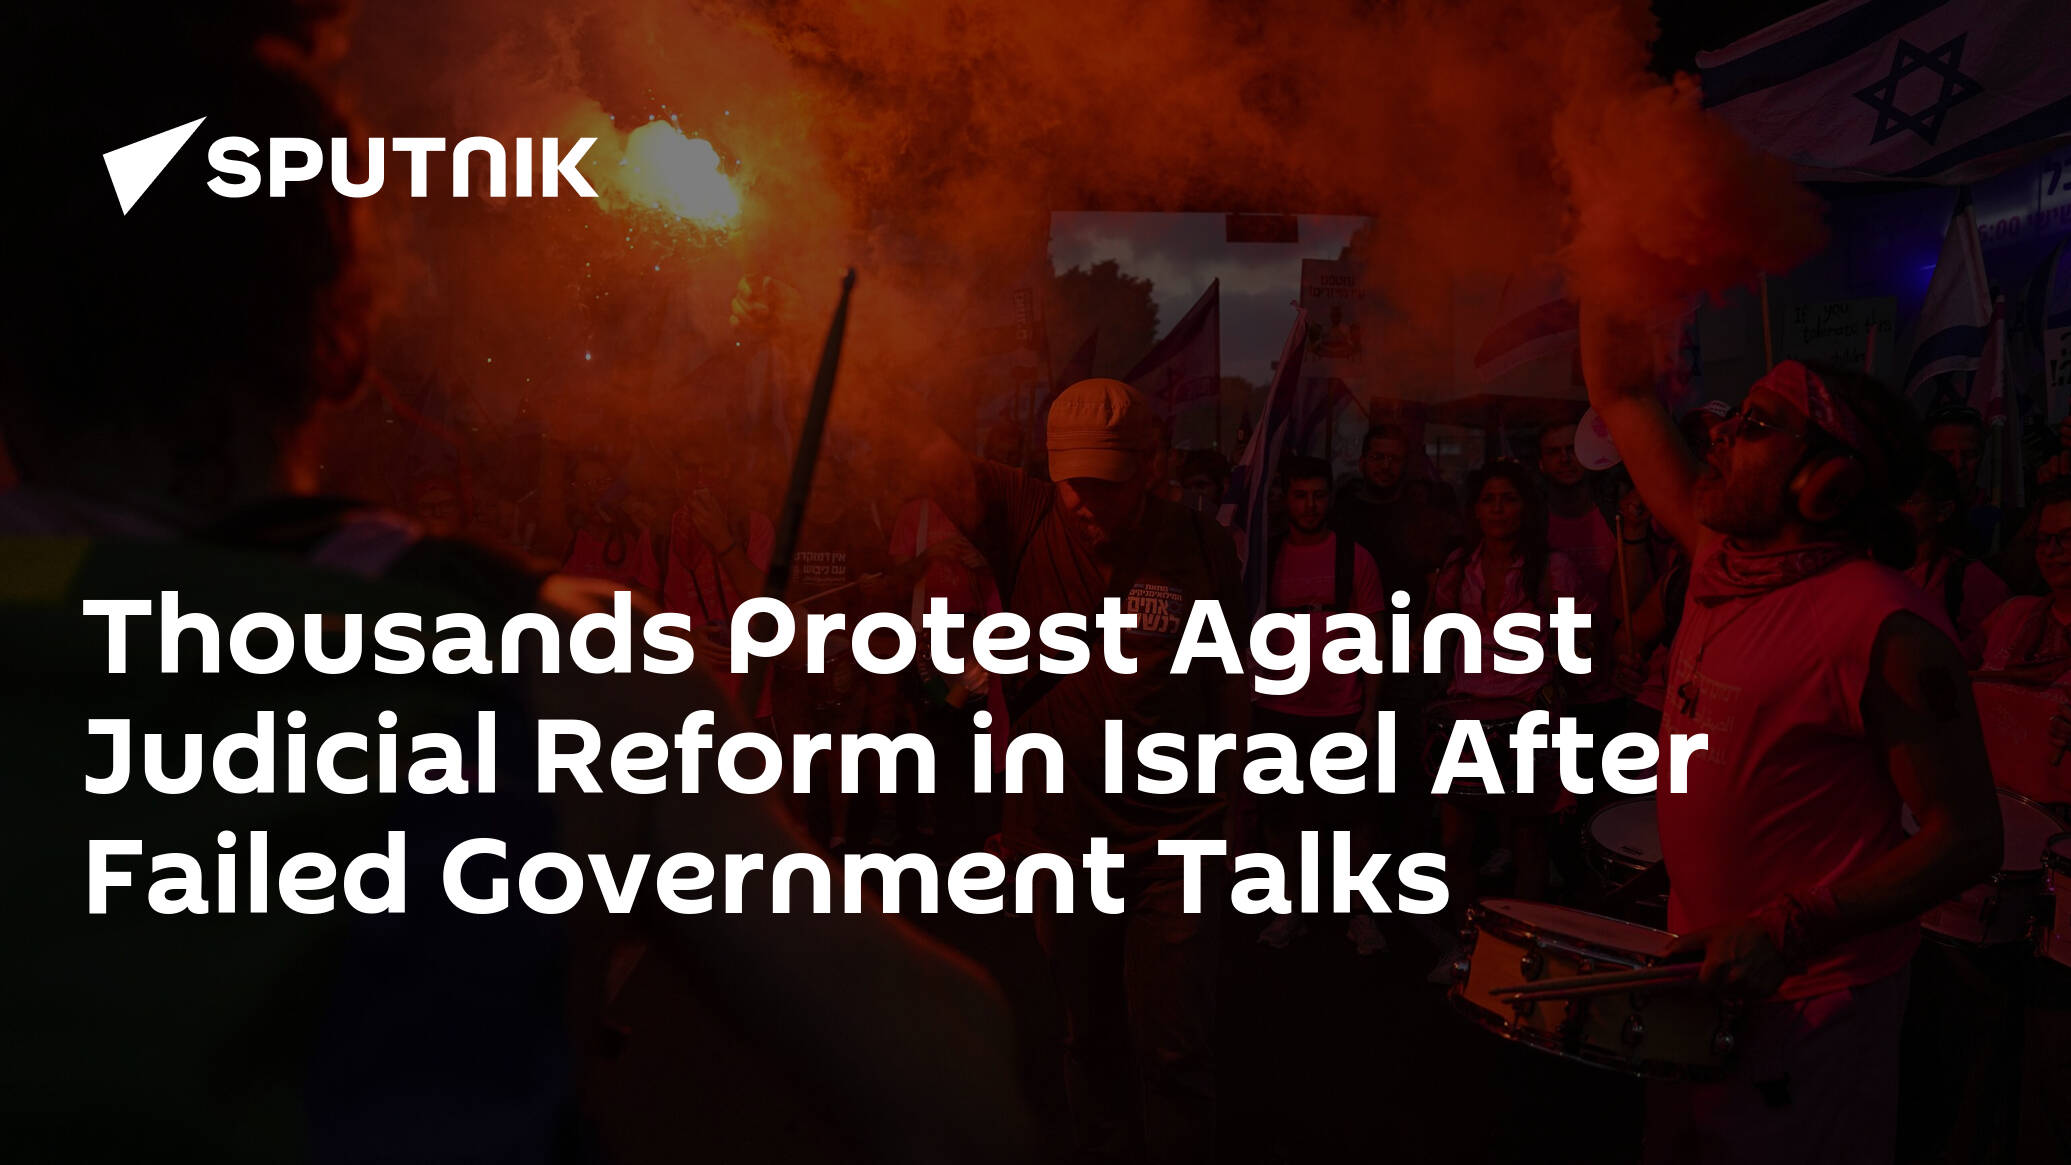 Thousands Protest Against Judicial Reform in Israel After Failed Government Talks